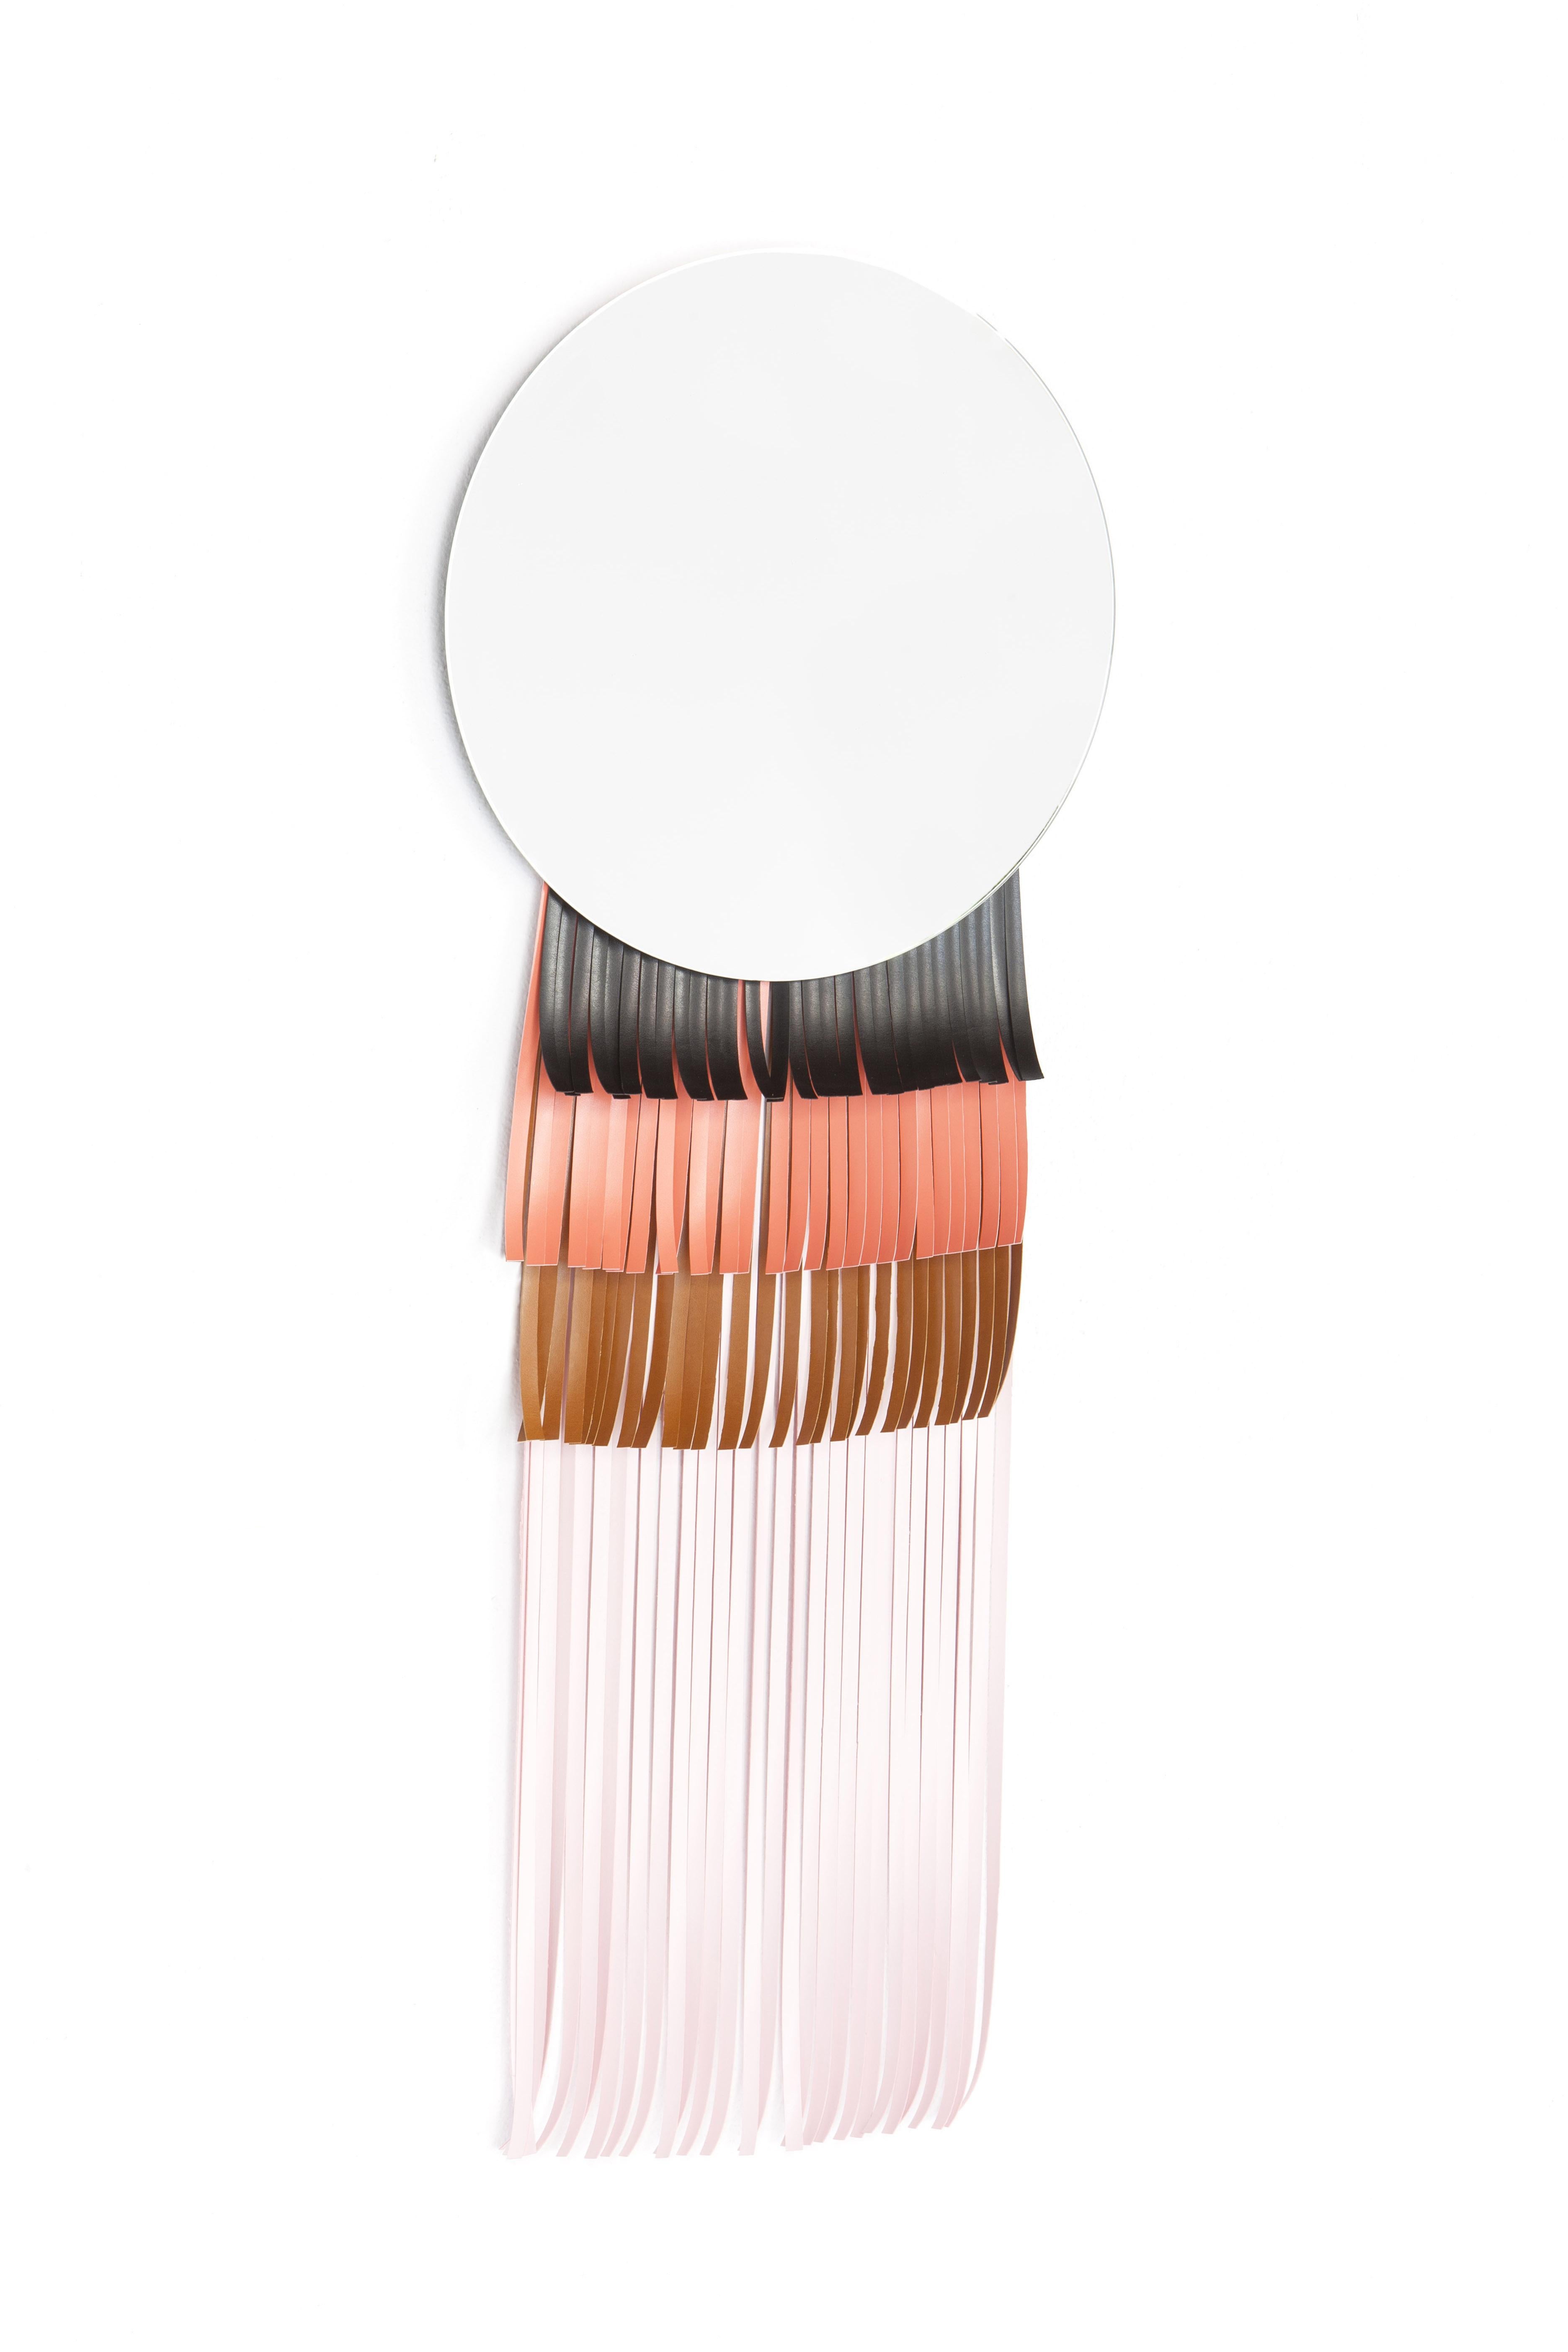 Masai round mirror by Serena Confalonieri
Dimensions: diameter 42 cm
Materials: Mirror and faux leather decorations
Faux leather colors: Black, salmon, natural brown and pink

Round mirror with faux leather decorations.

Serena Confalonieri